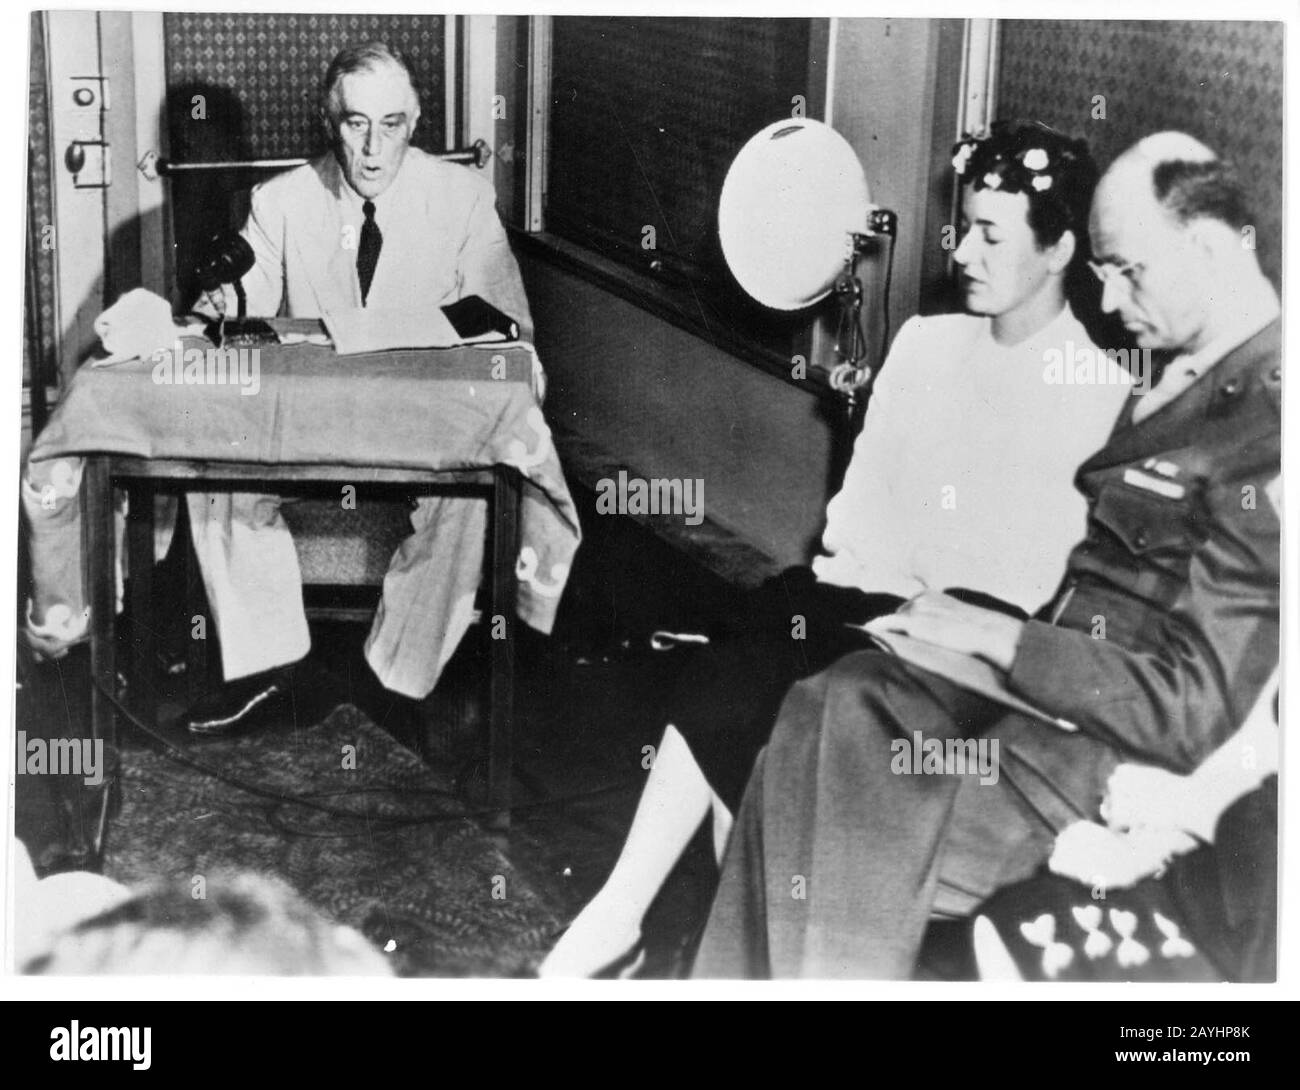 Franklin D. Roosevelt accepts nomination by DNC at Chicago from train at San Diego, California with Mr. & Mrs. James Roosevelt. July 20, 1944. Stock Photo